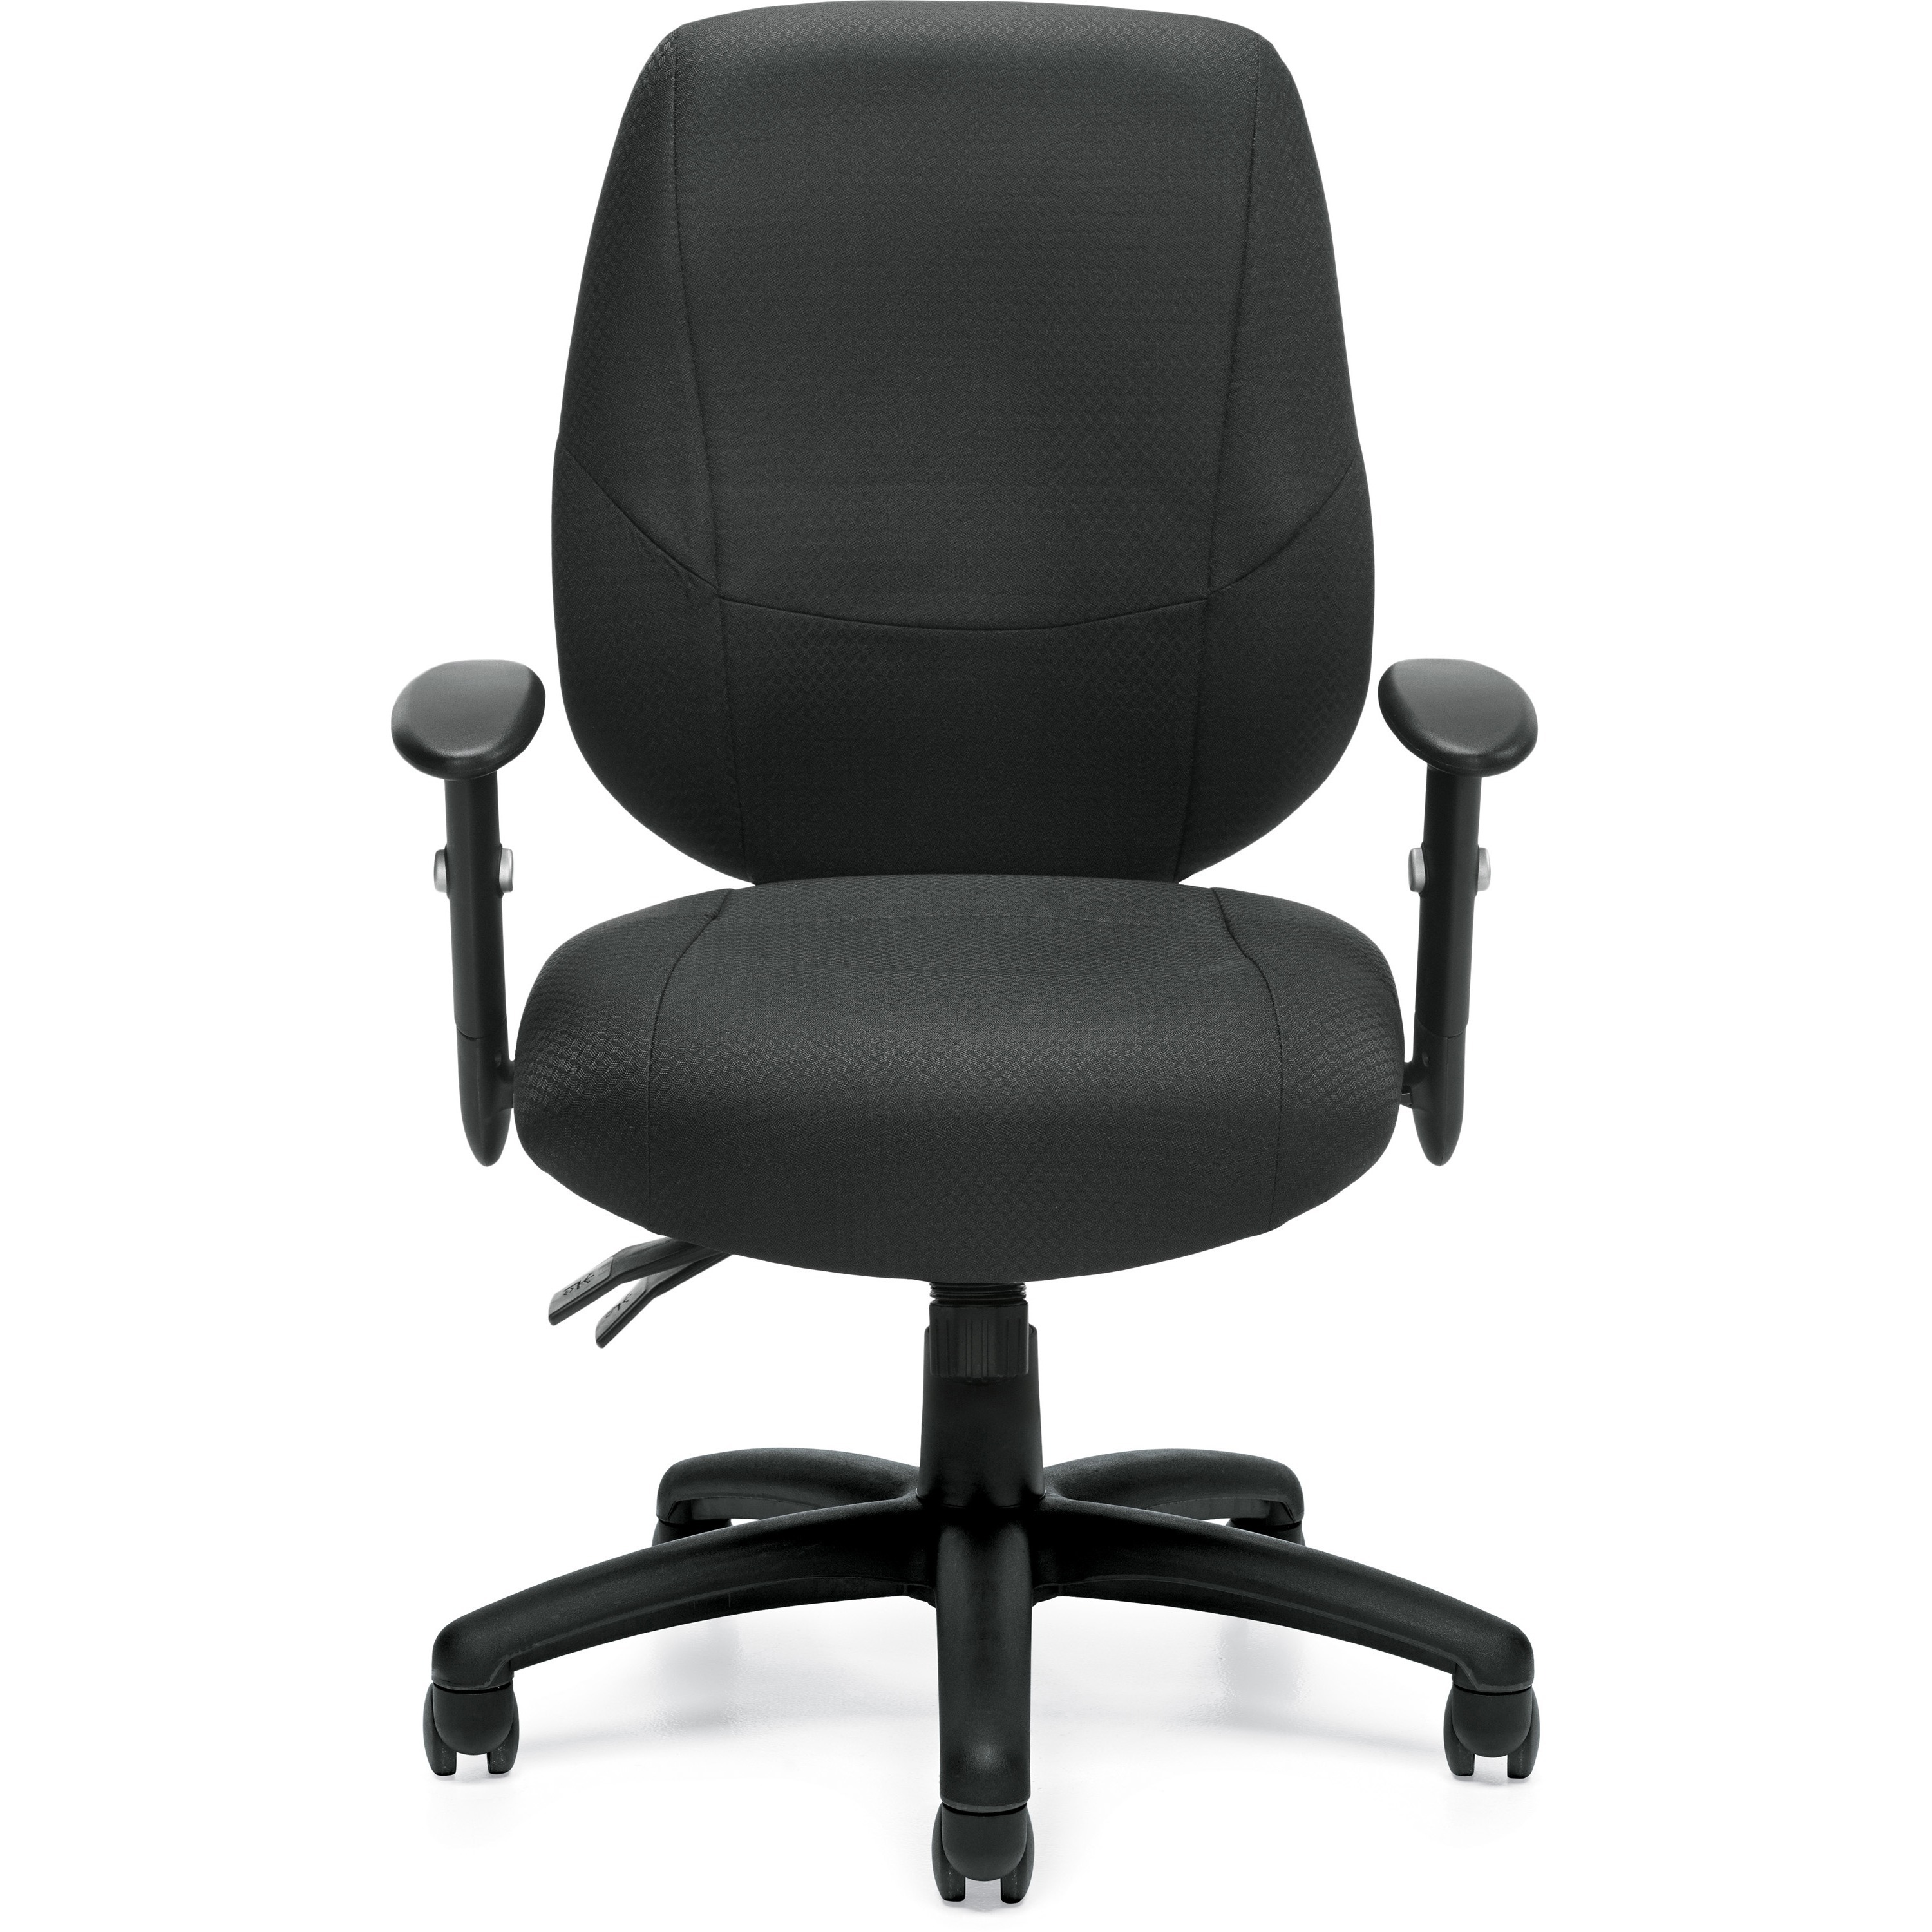 Offices to Go® Six 31 Operator Chair - Black Polyester Seat - Medium Back -  5-star Base - Black - Quilted Fabric, Fabric - 1 Each